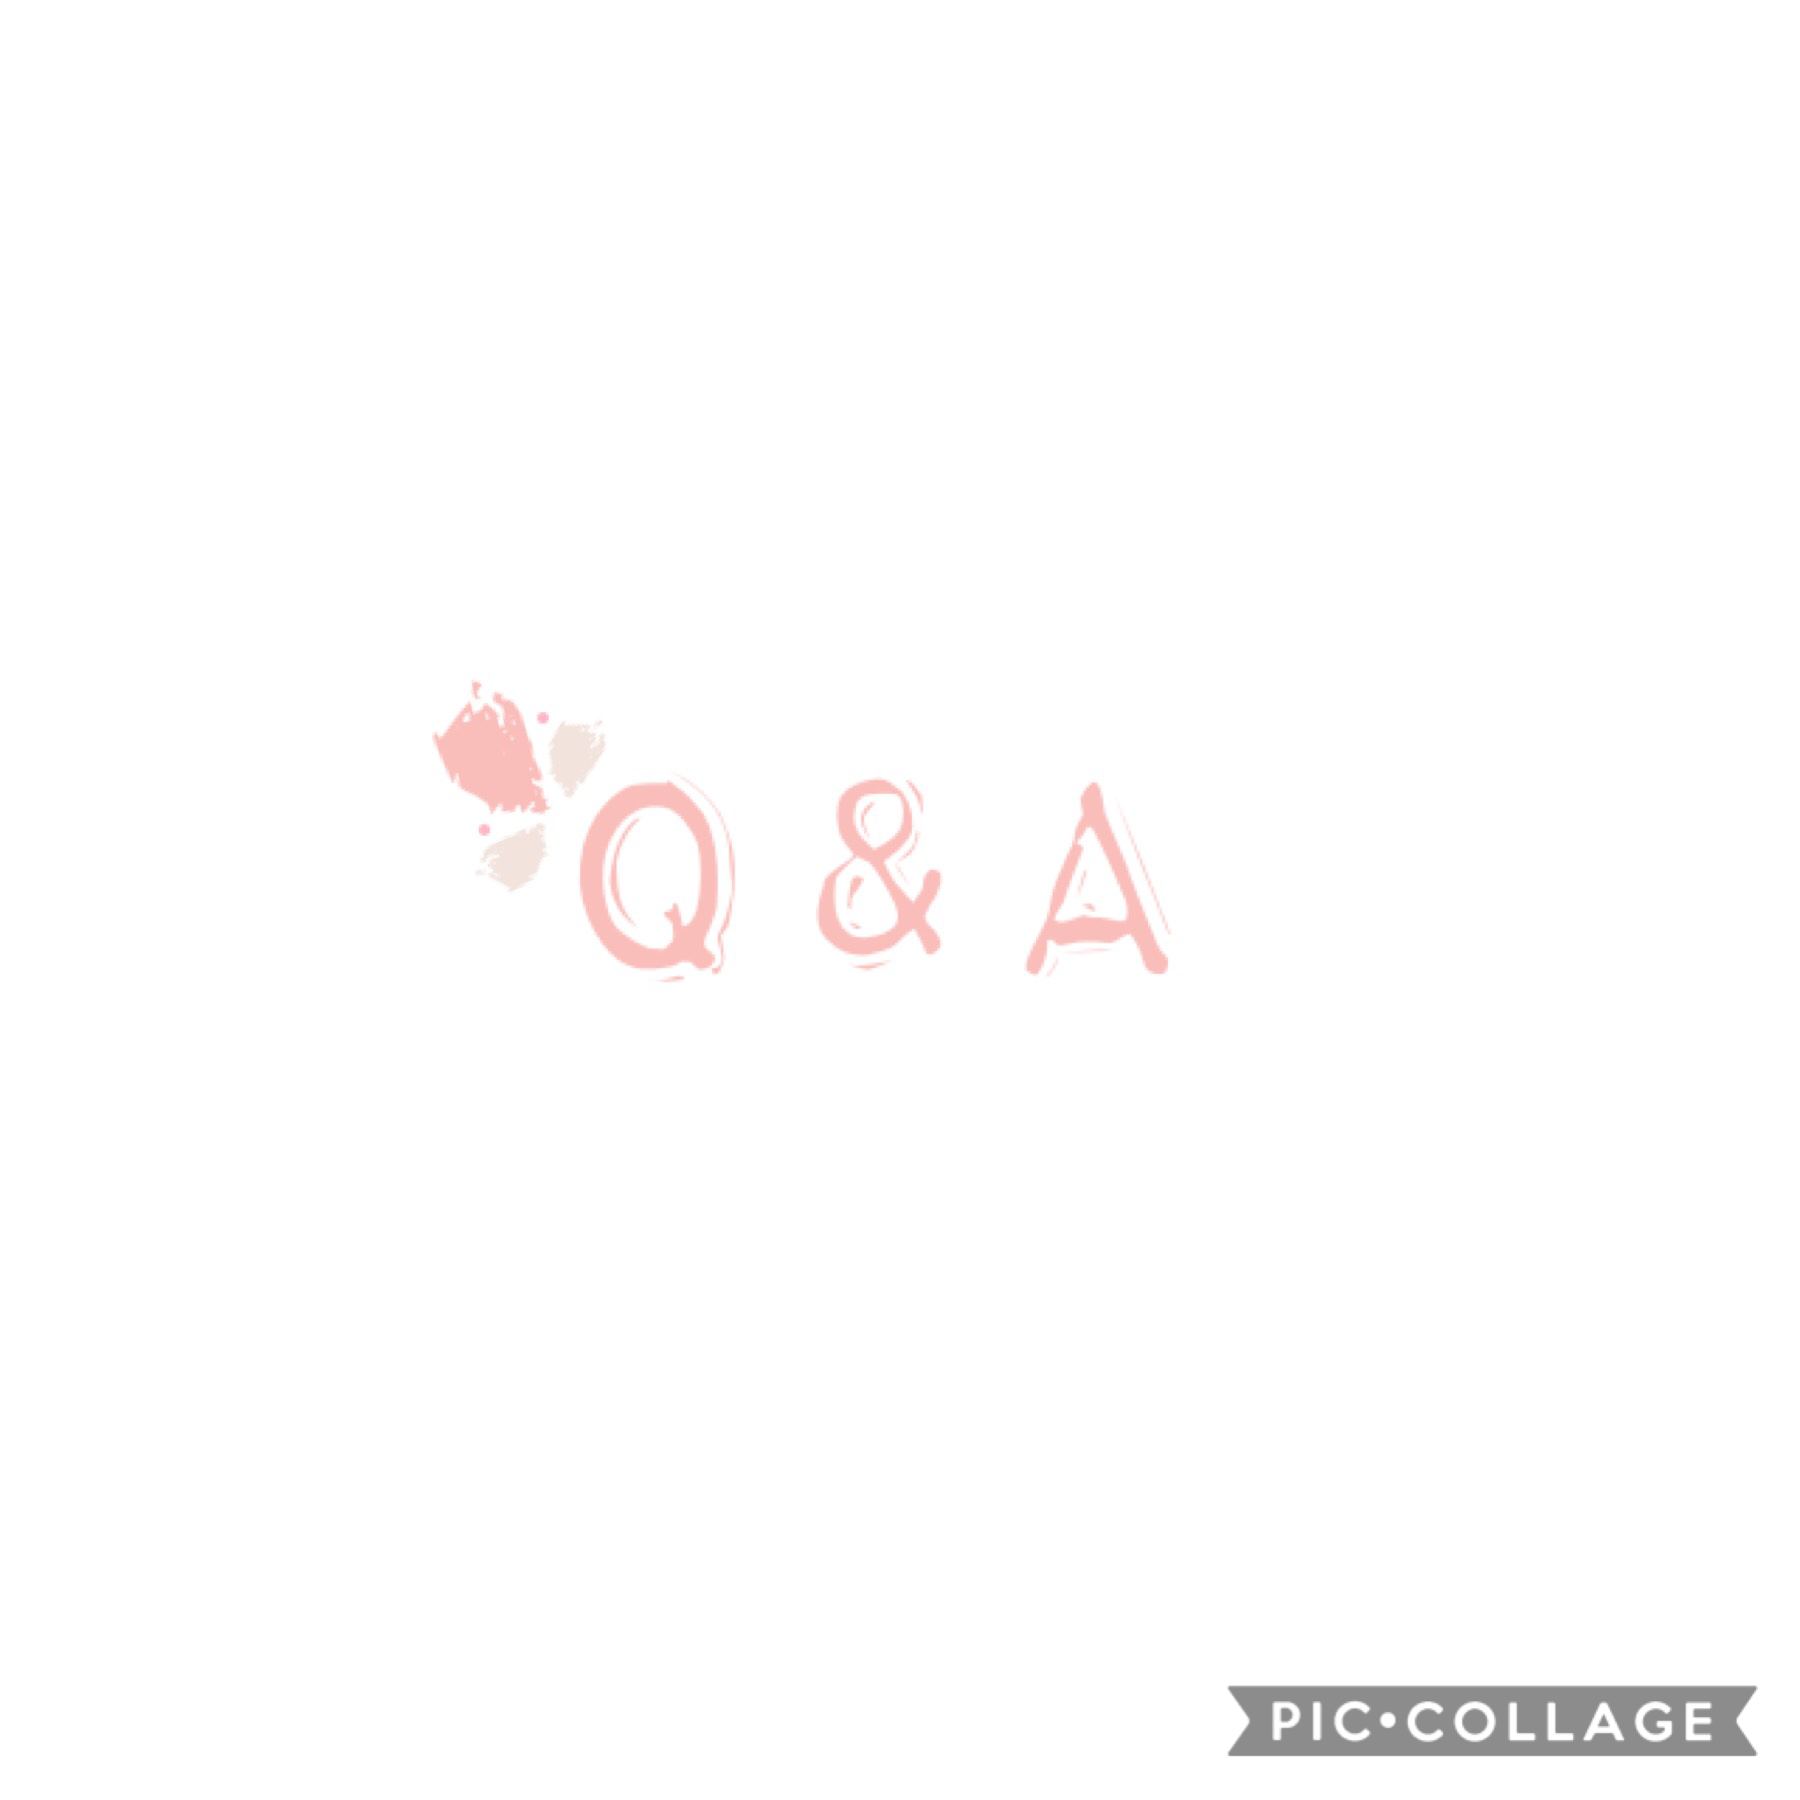 ALRIGHT!!!! IT’S TIME!! I HAVE BEEN SO BUSY MAKING COLLAGES THAT I TOTALLY FORGOT THAT I WANTED TO DO A Q&A FOR YALL!!! I AM SUPER EXCITED!! ASK ME ANYTHING!!!! BUT NOTHING LIKE “ where do you live” AND STUFF 😂